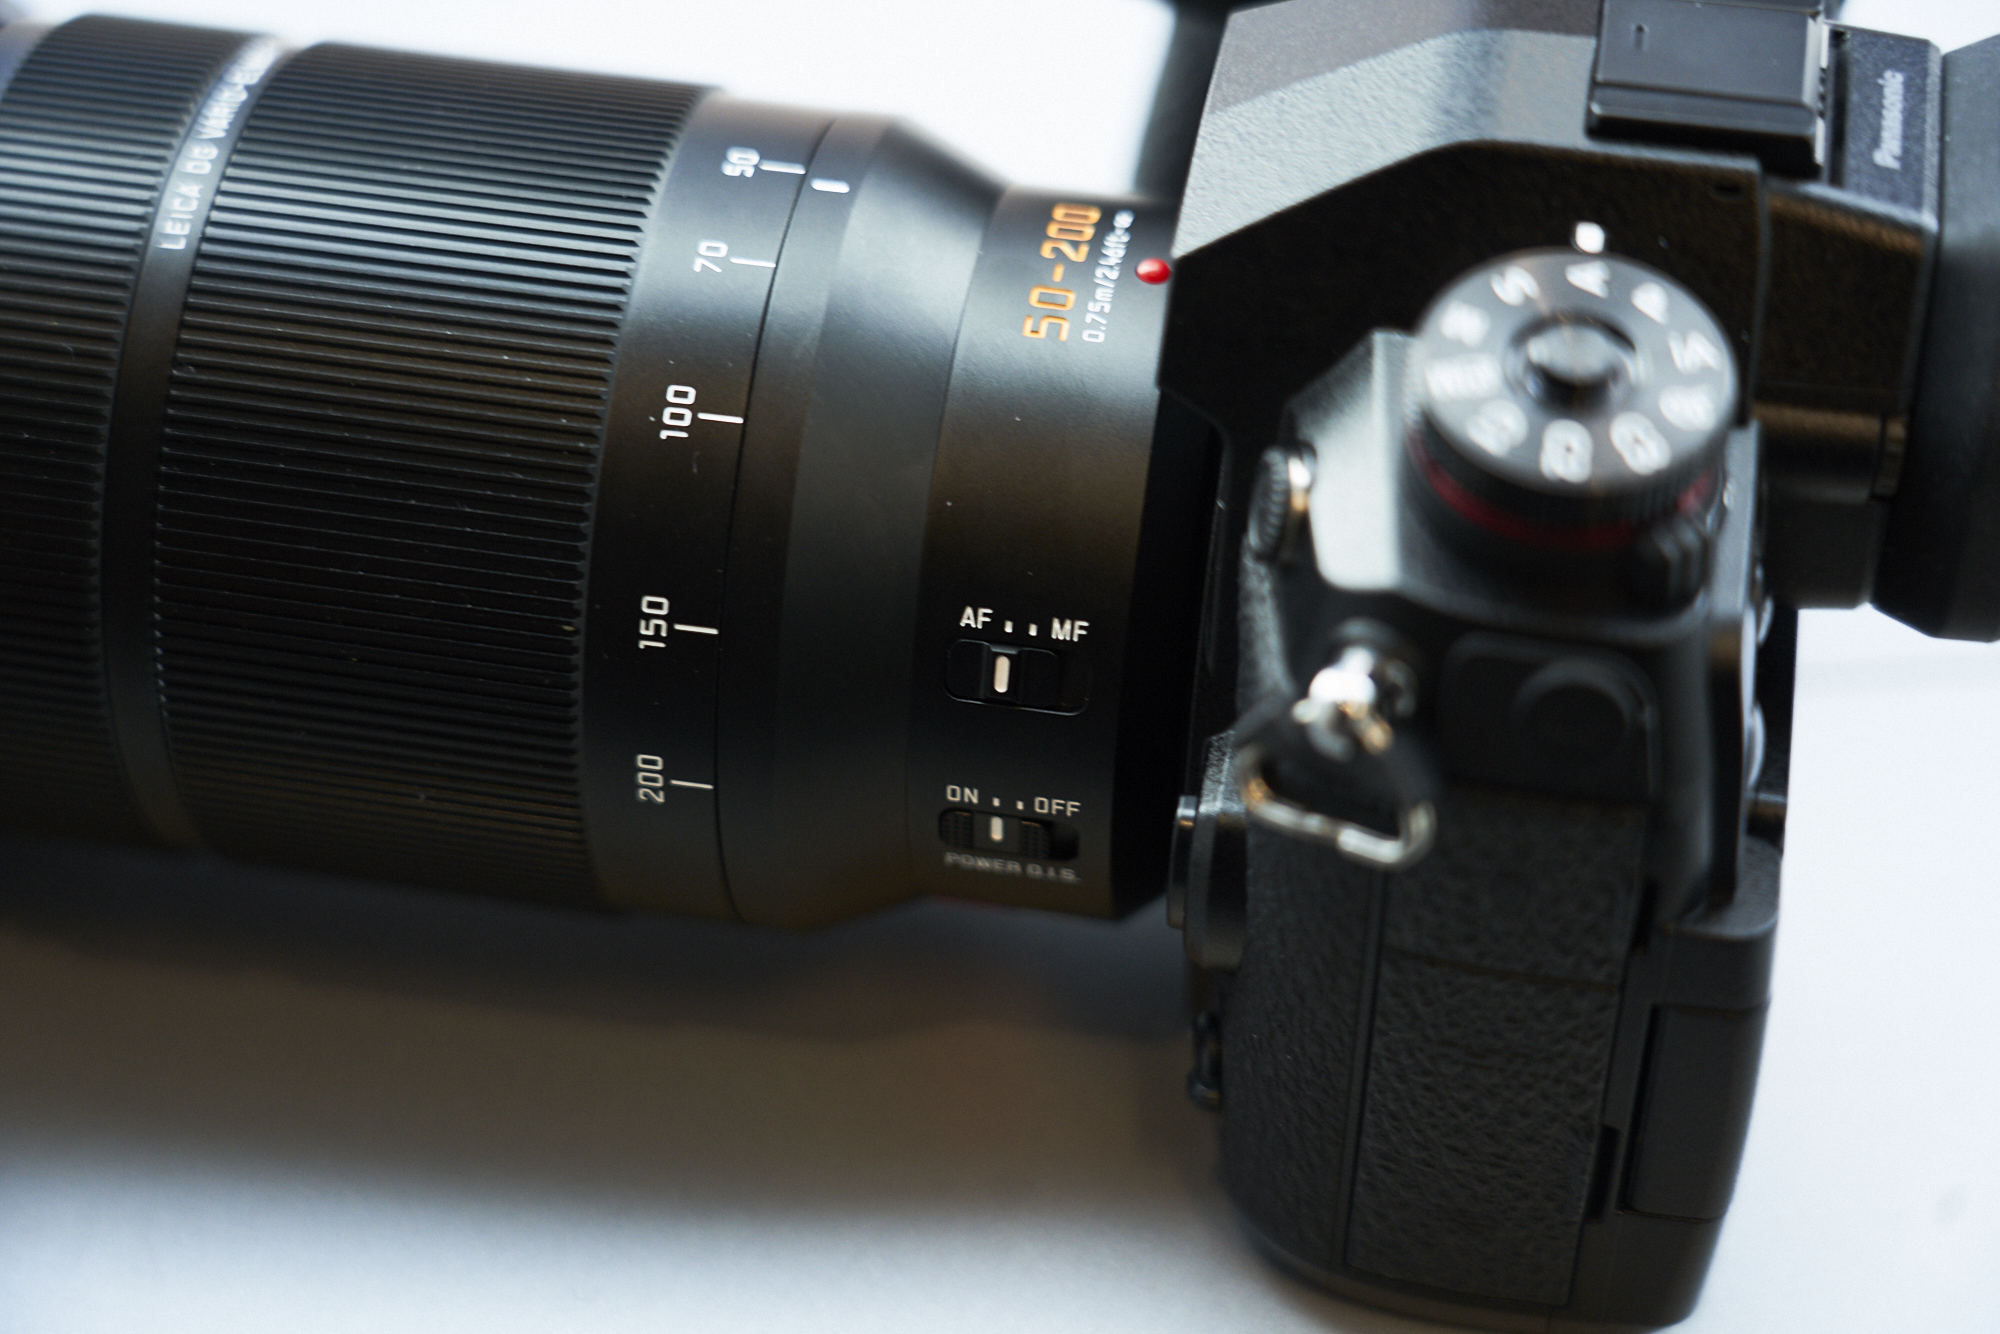 The Panasonic 50-200mm f2.8-4.0 ASPH is Quite the Superzoom